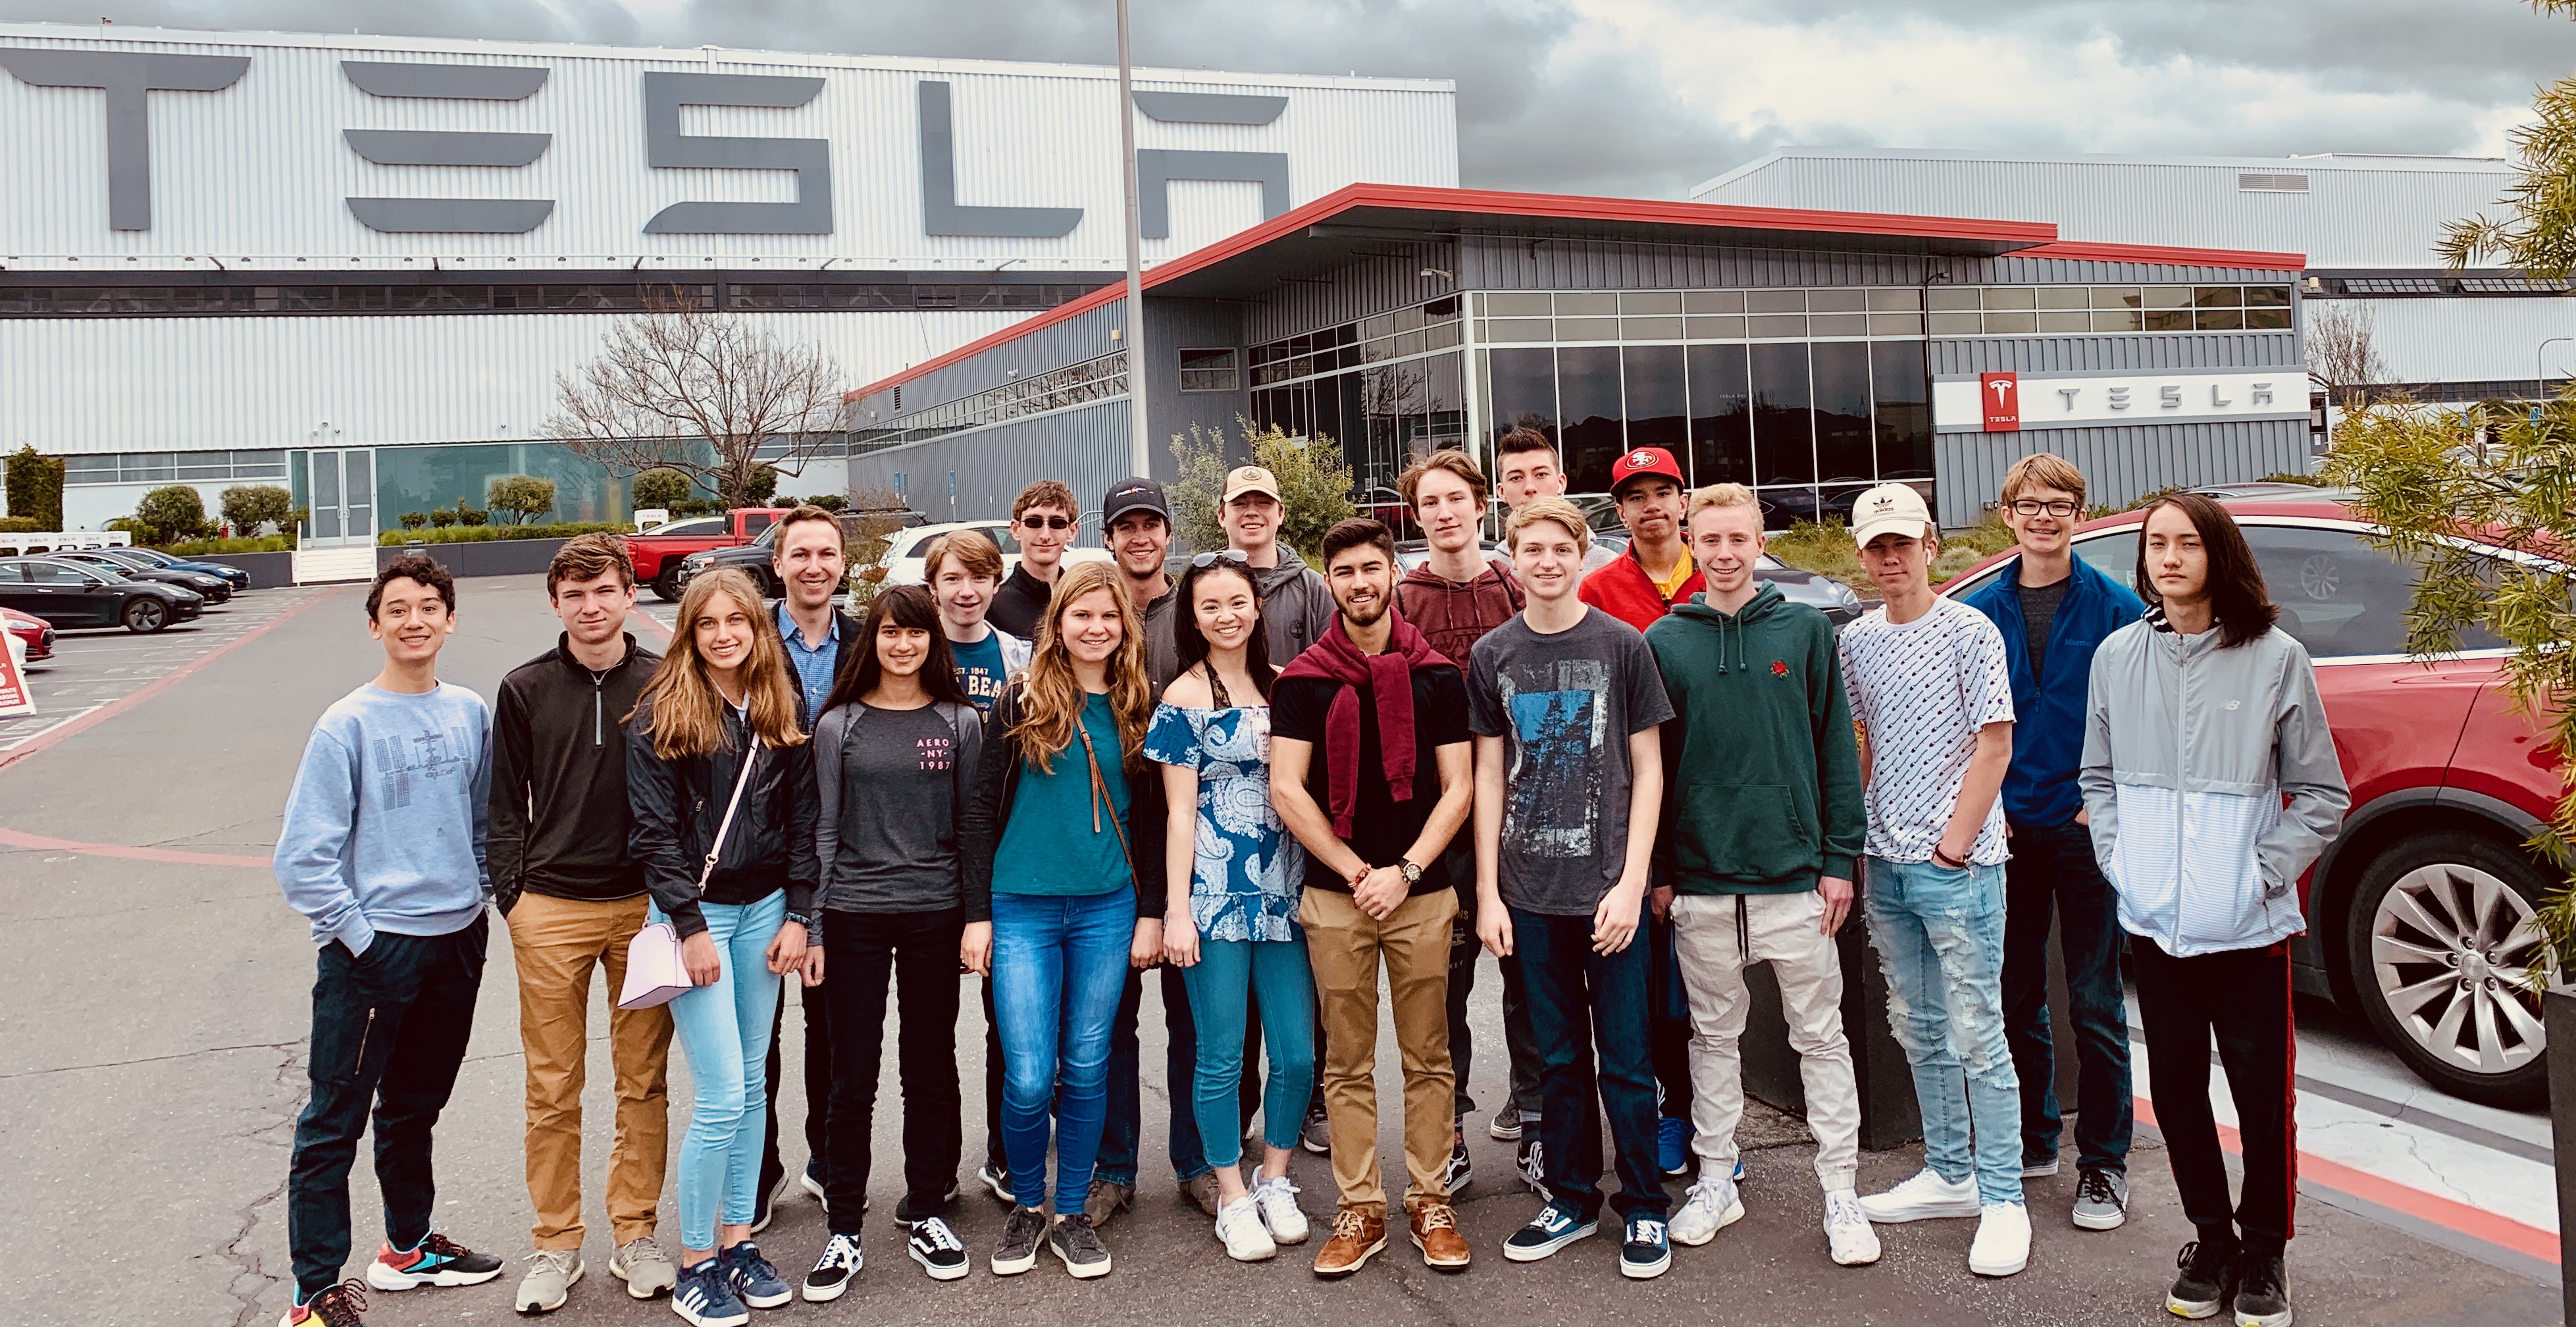 Silicon Valley FRHS 2019 group